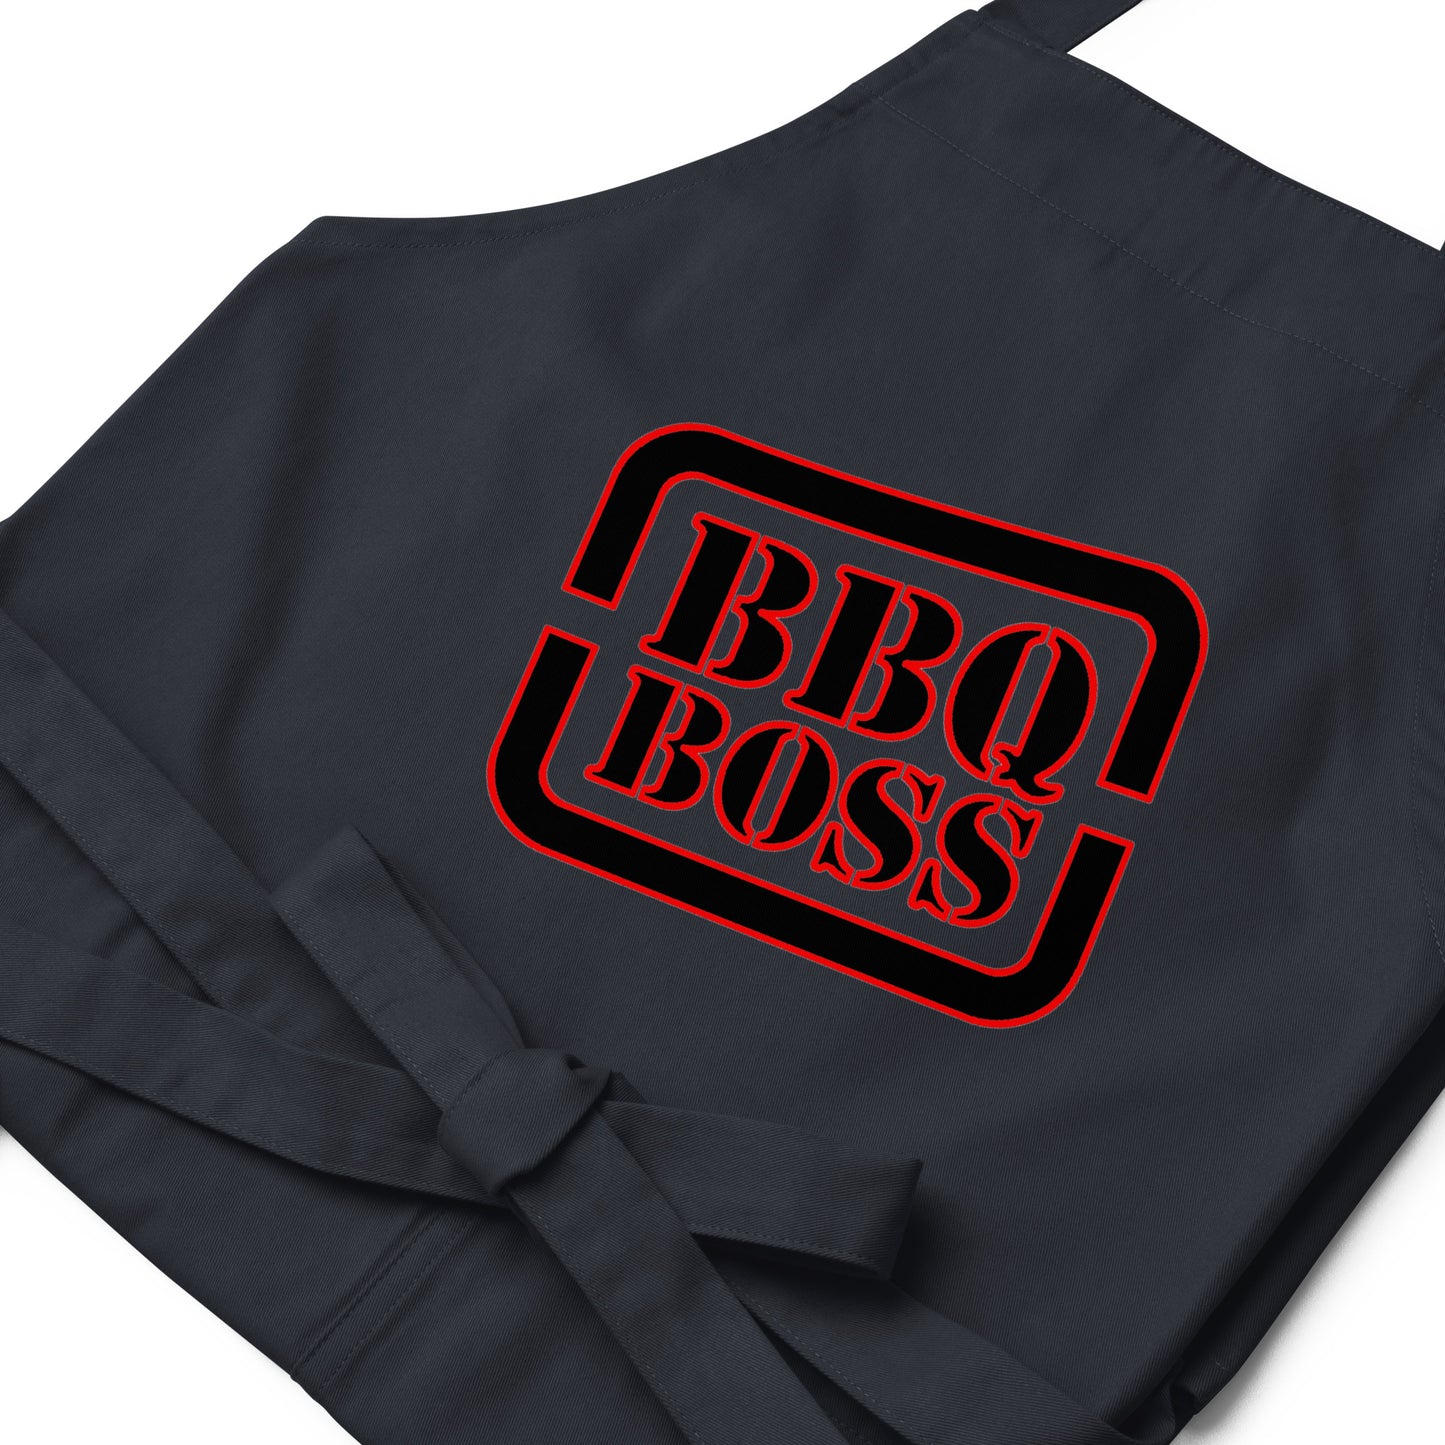 navy blue apron with text "BBQ BOSS"